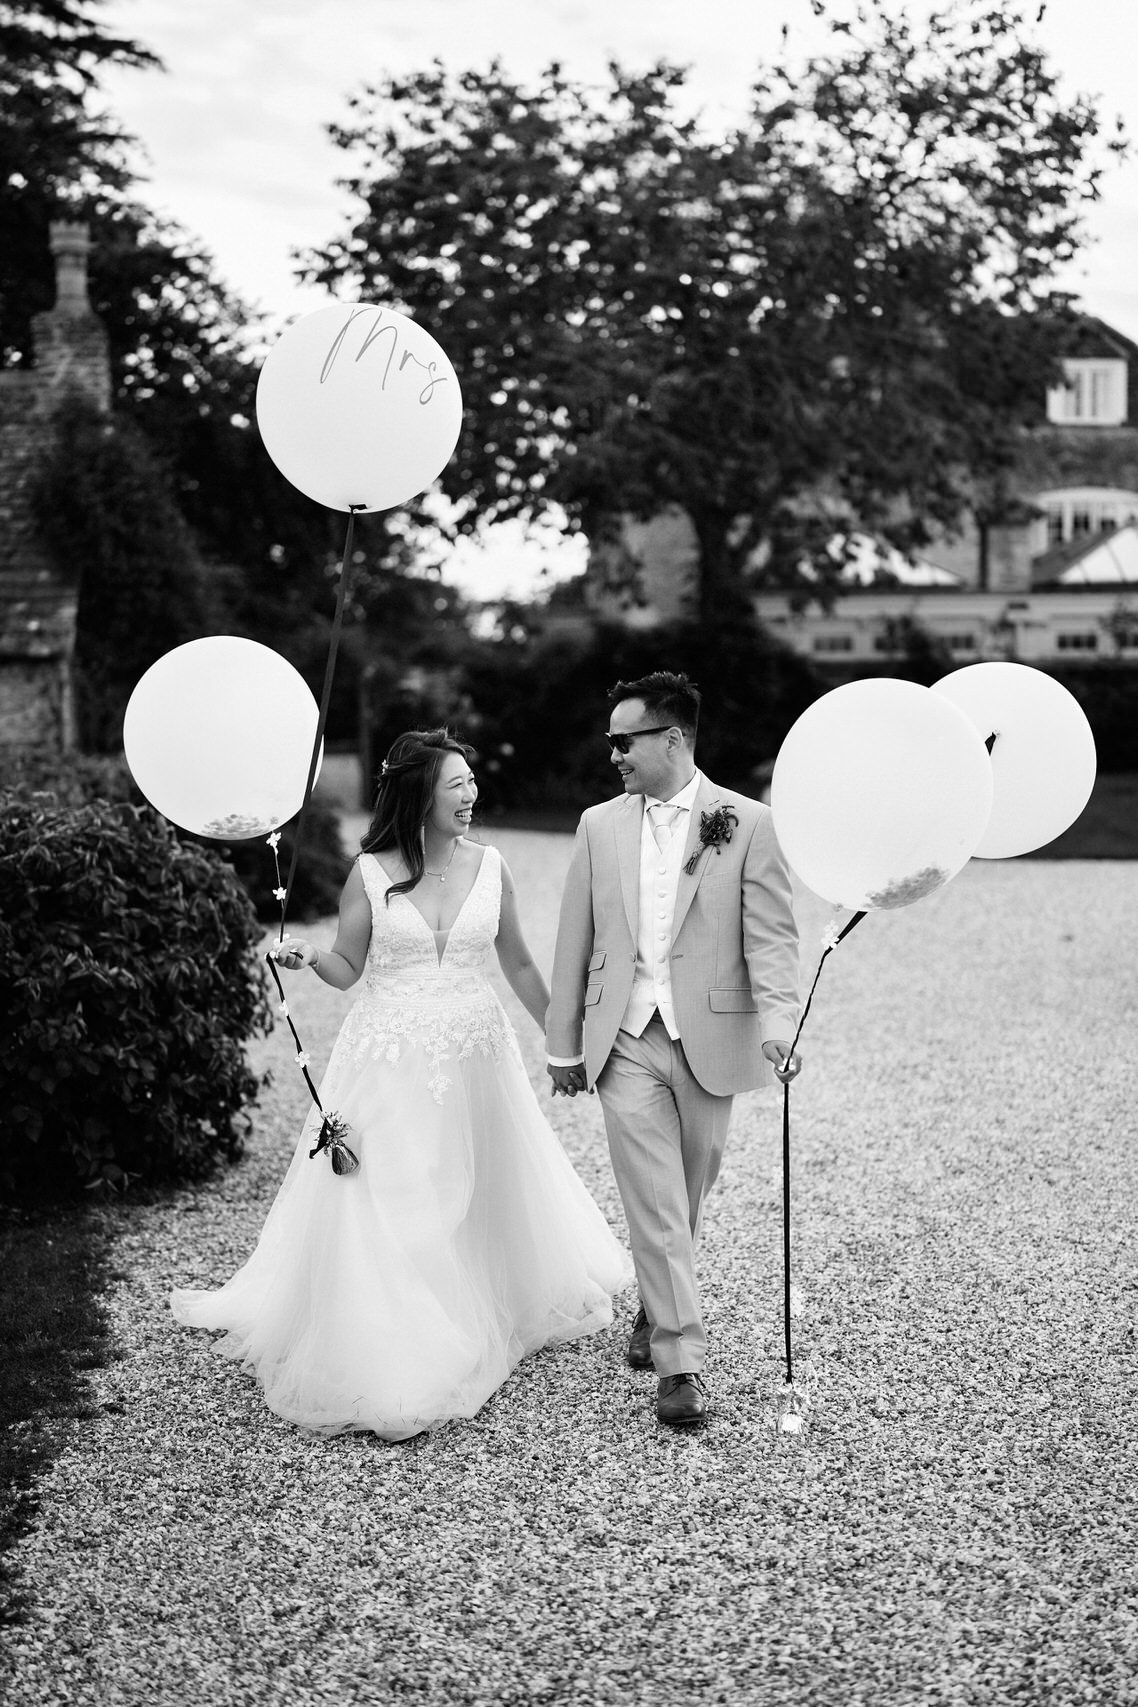 Picture of a bride and groom holding balloons in black and white.